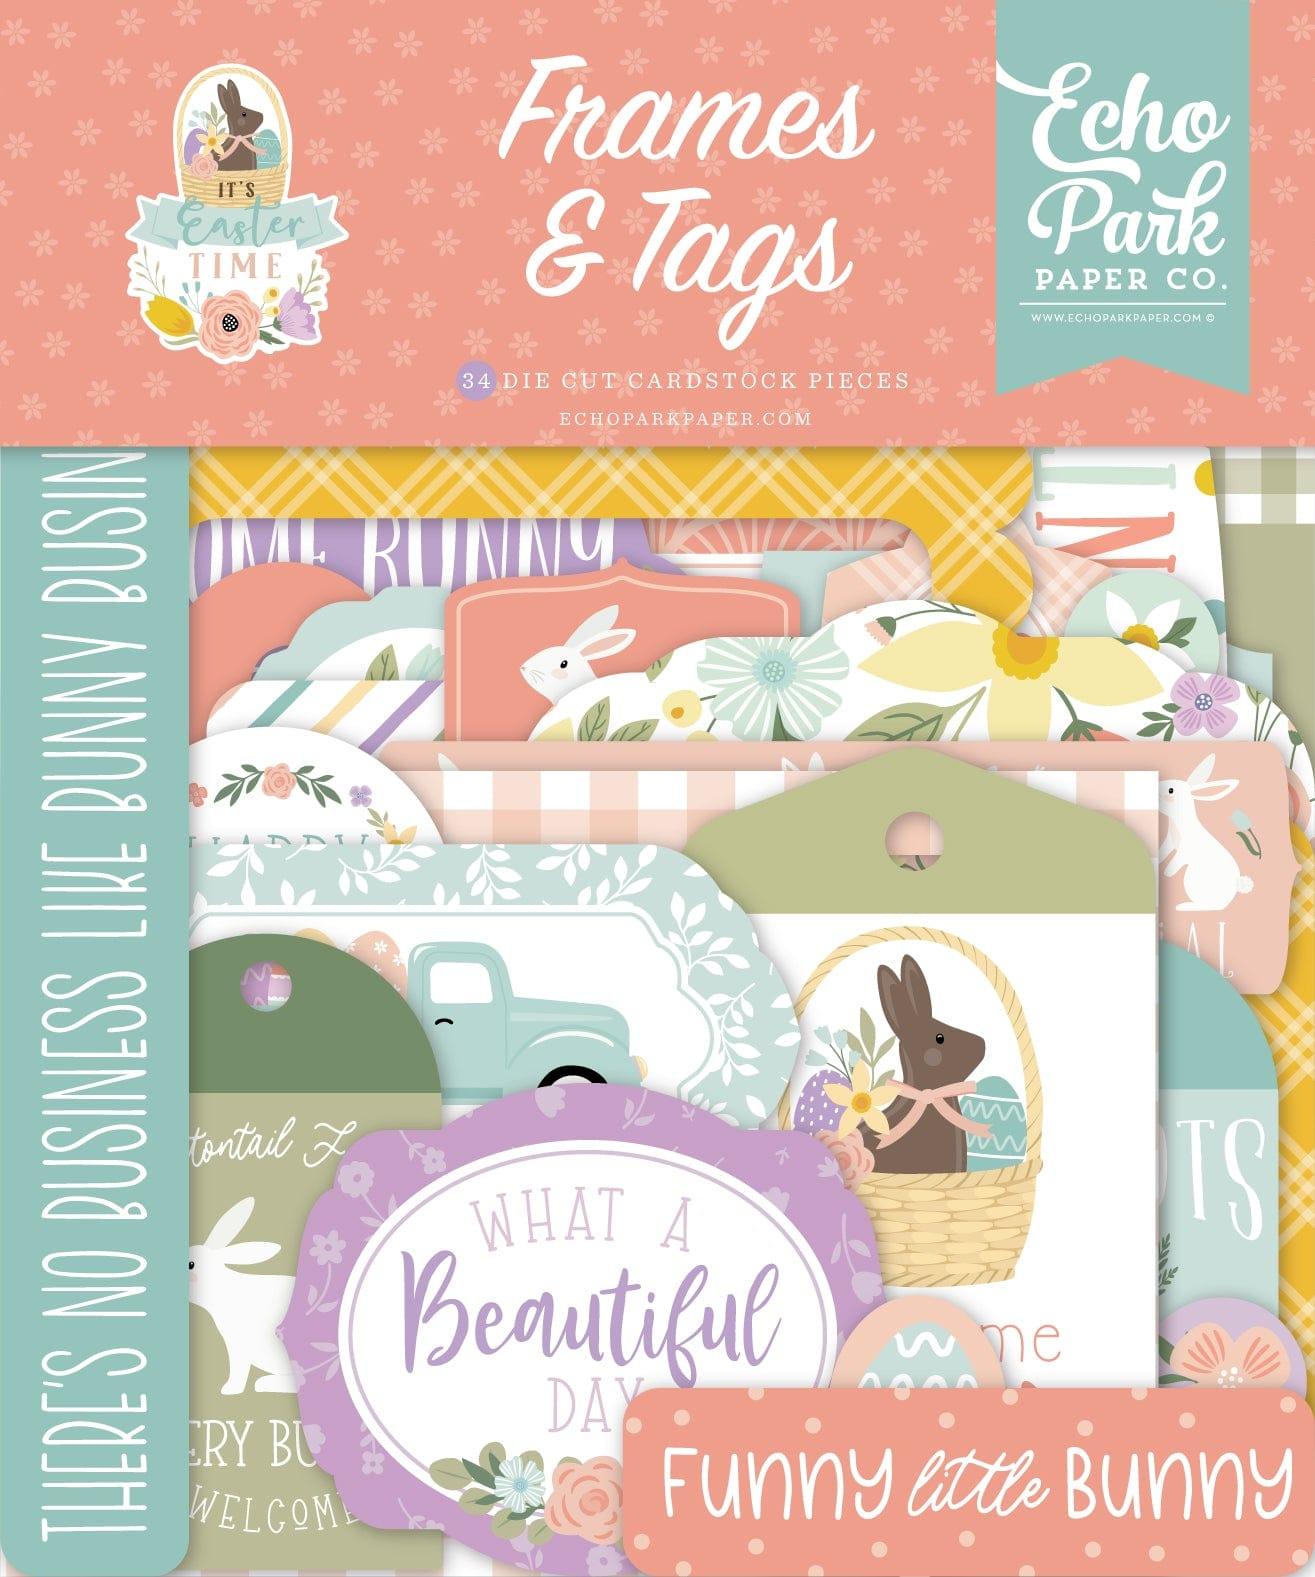 It's Easter Time Collection 5 x 5 Scrapbook Tags & Frames Die Cuts by Echo Park Paper - Scrapbook Supply Companies